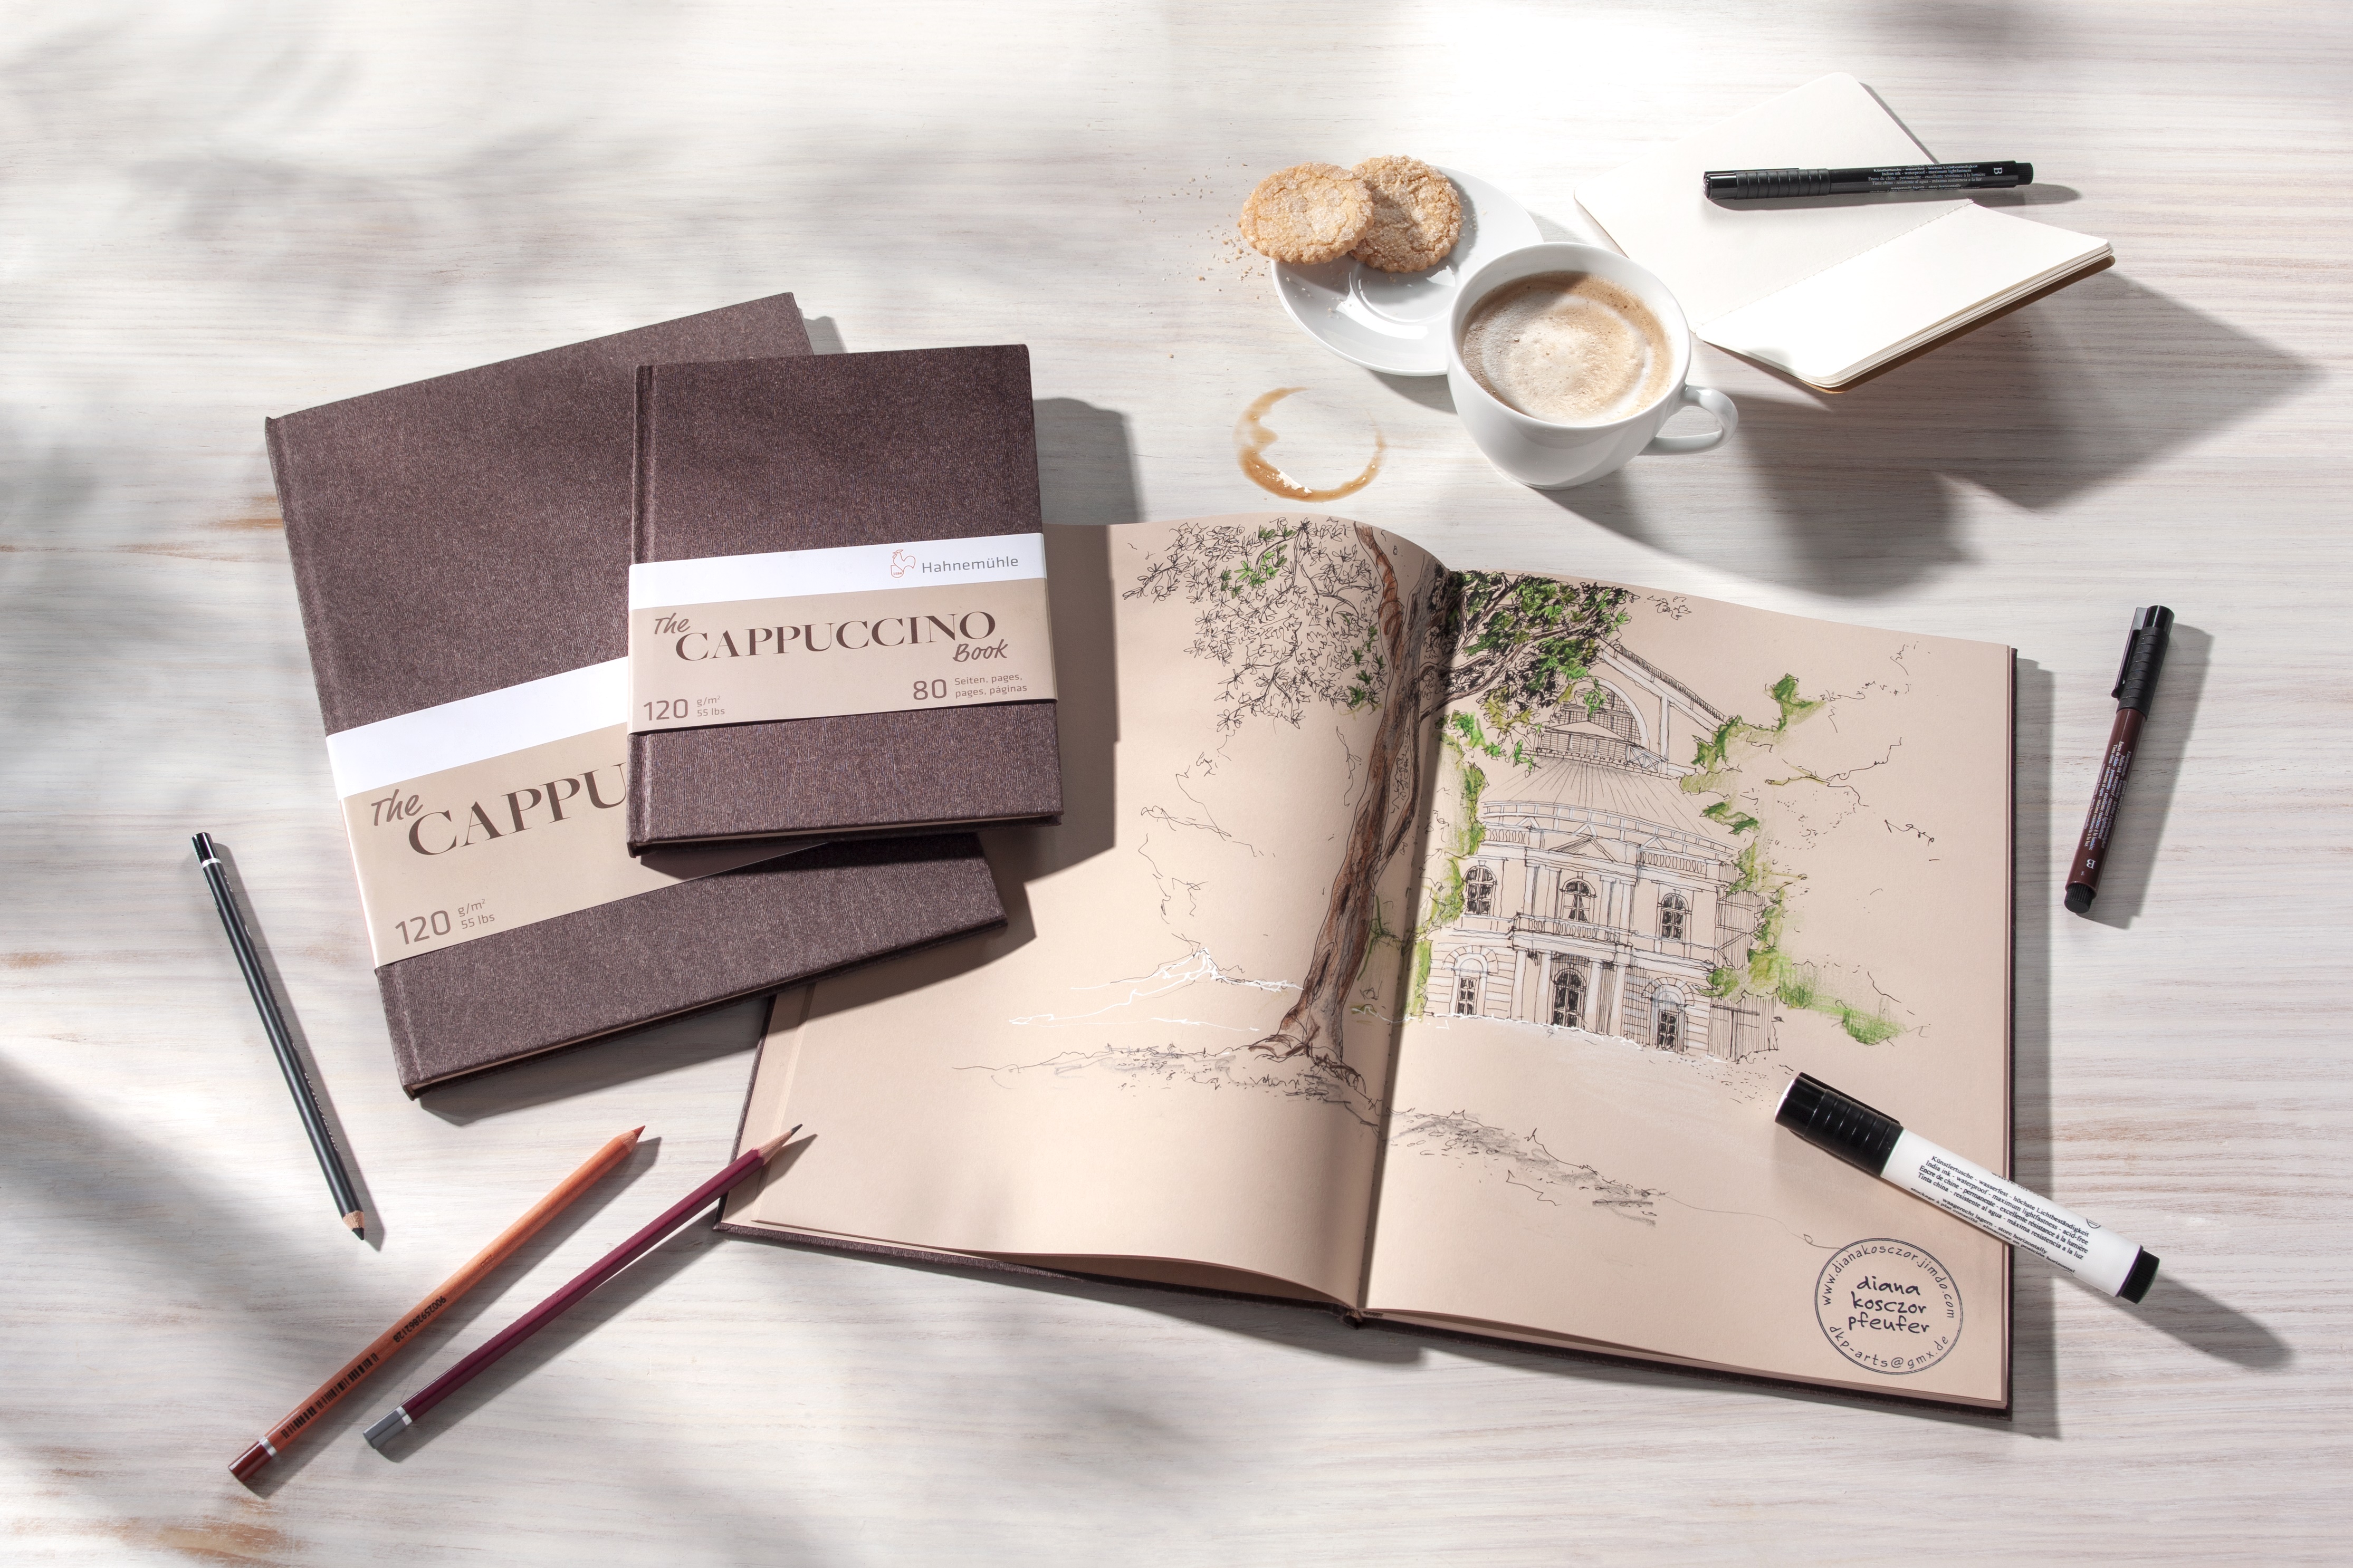 New sketchbook by Hahnemühle: The Cappuccino Book